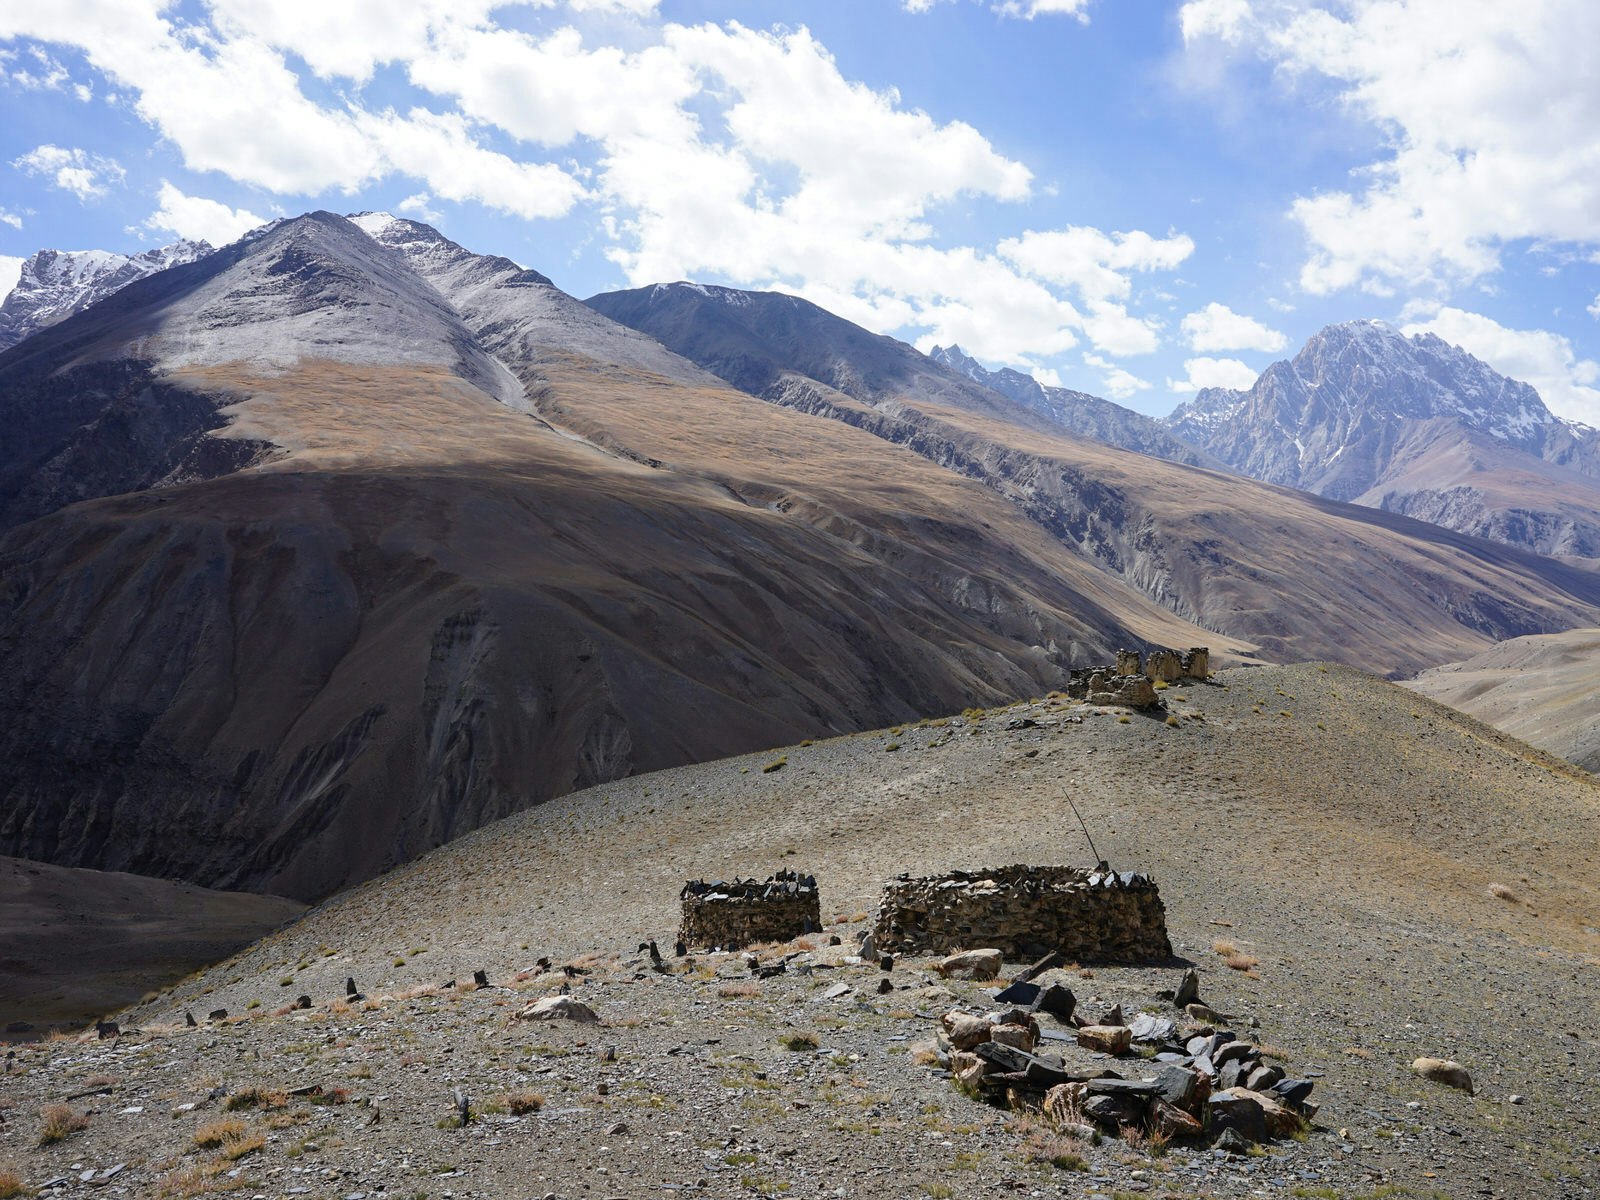 A small stone ruin sits atop a ridge in the foreground with tall mountains in the background